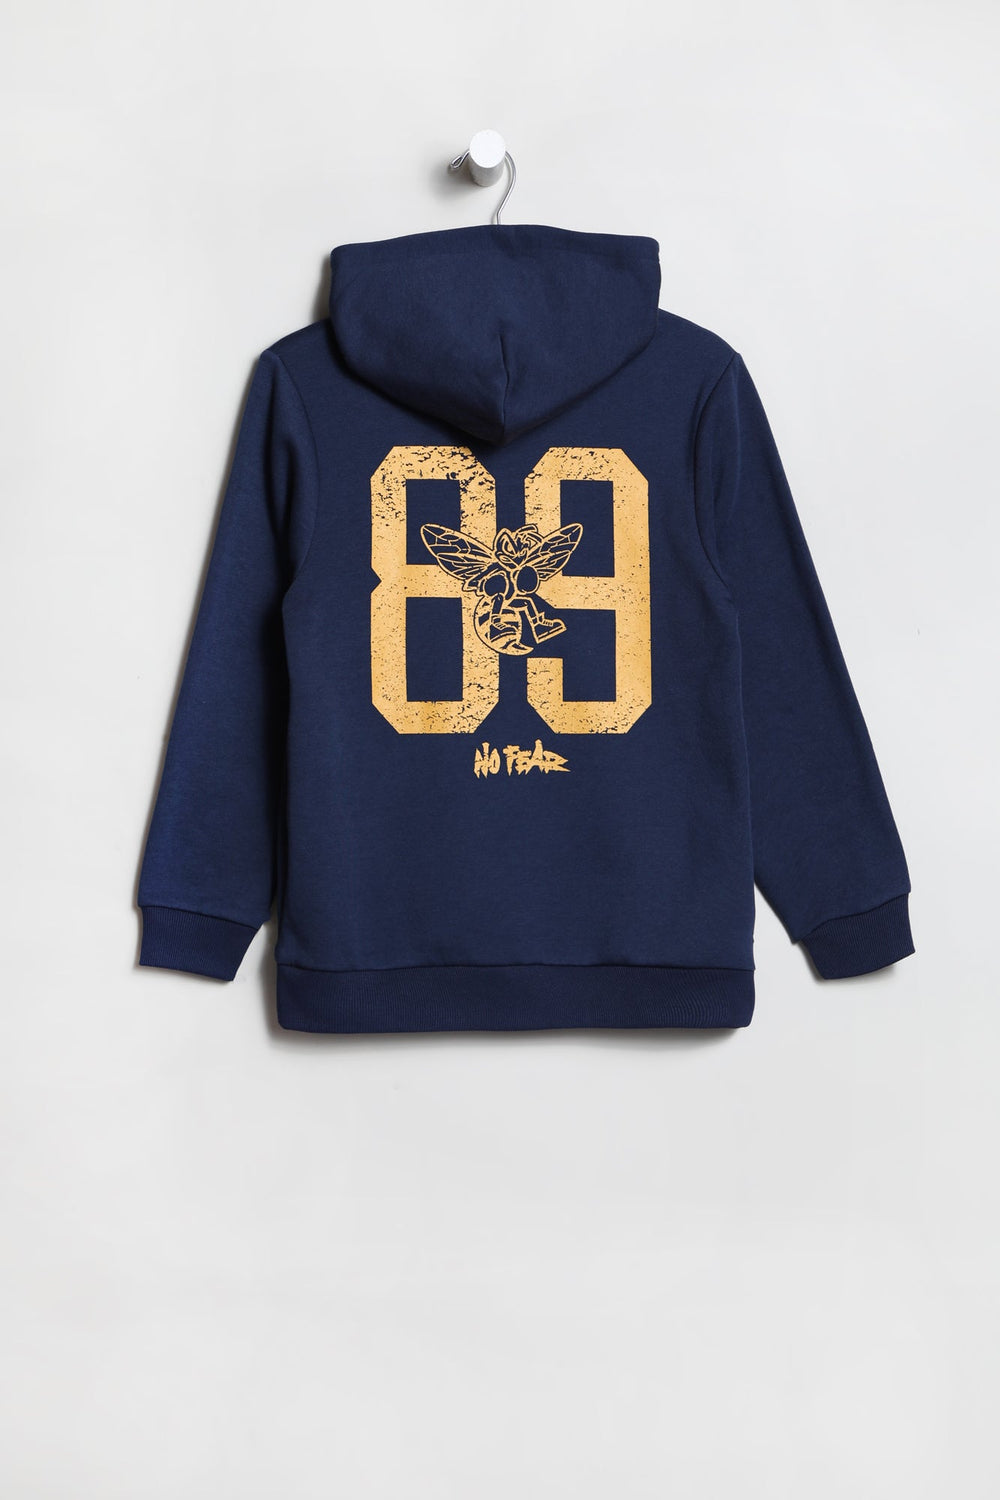 No Fear Youth Athletics Hoodie Navy